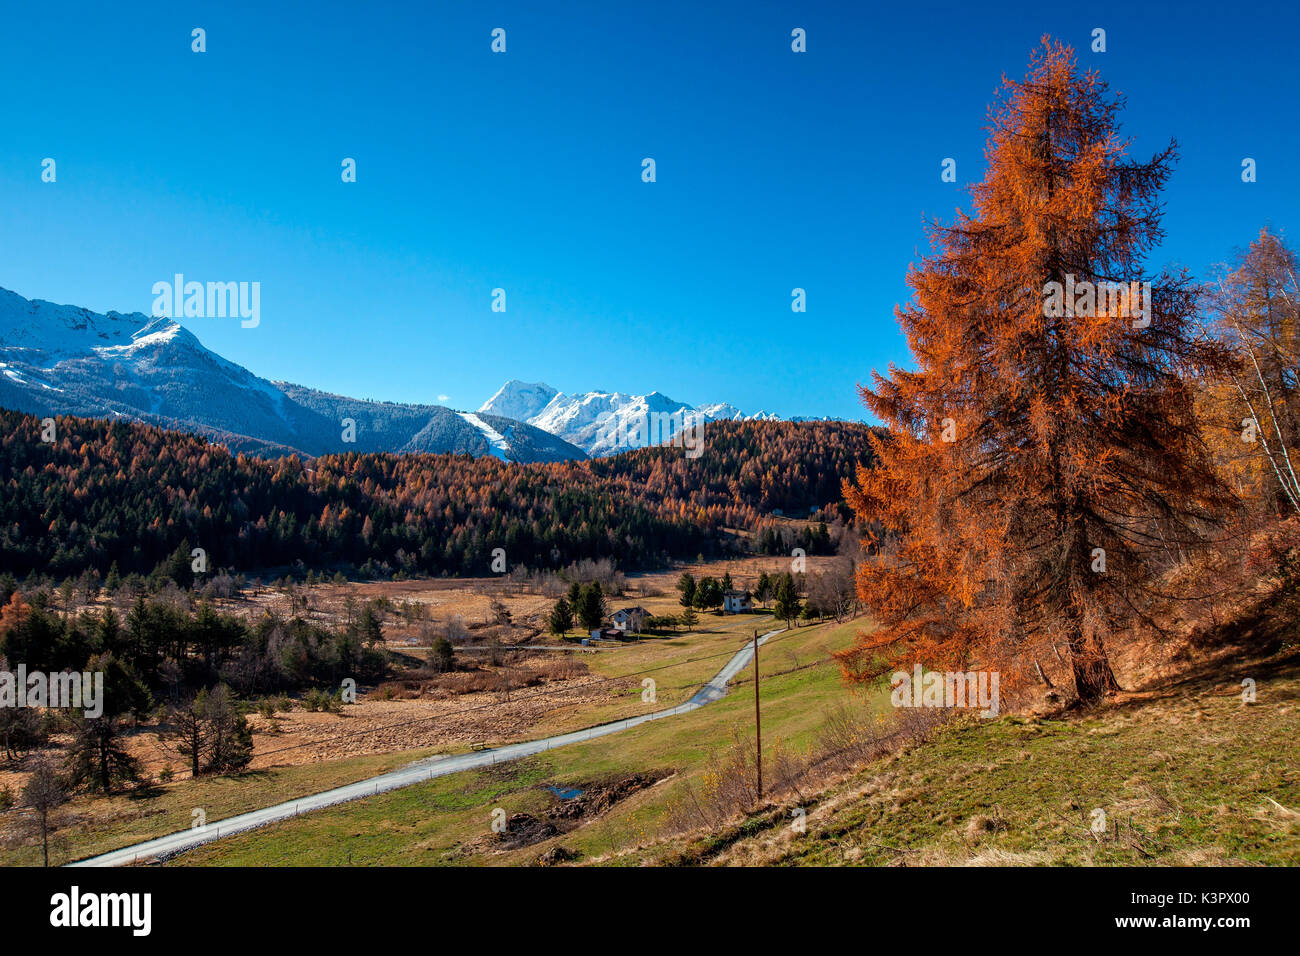 The rich oranges of the trees in the Trivigno plain contrasting with the whites of the snow-capped peaks in the background - Trivigno, Valtellina, Sondrio, Lombardy, Italy. Europe Stock Photo